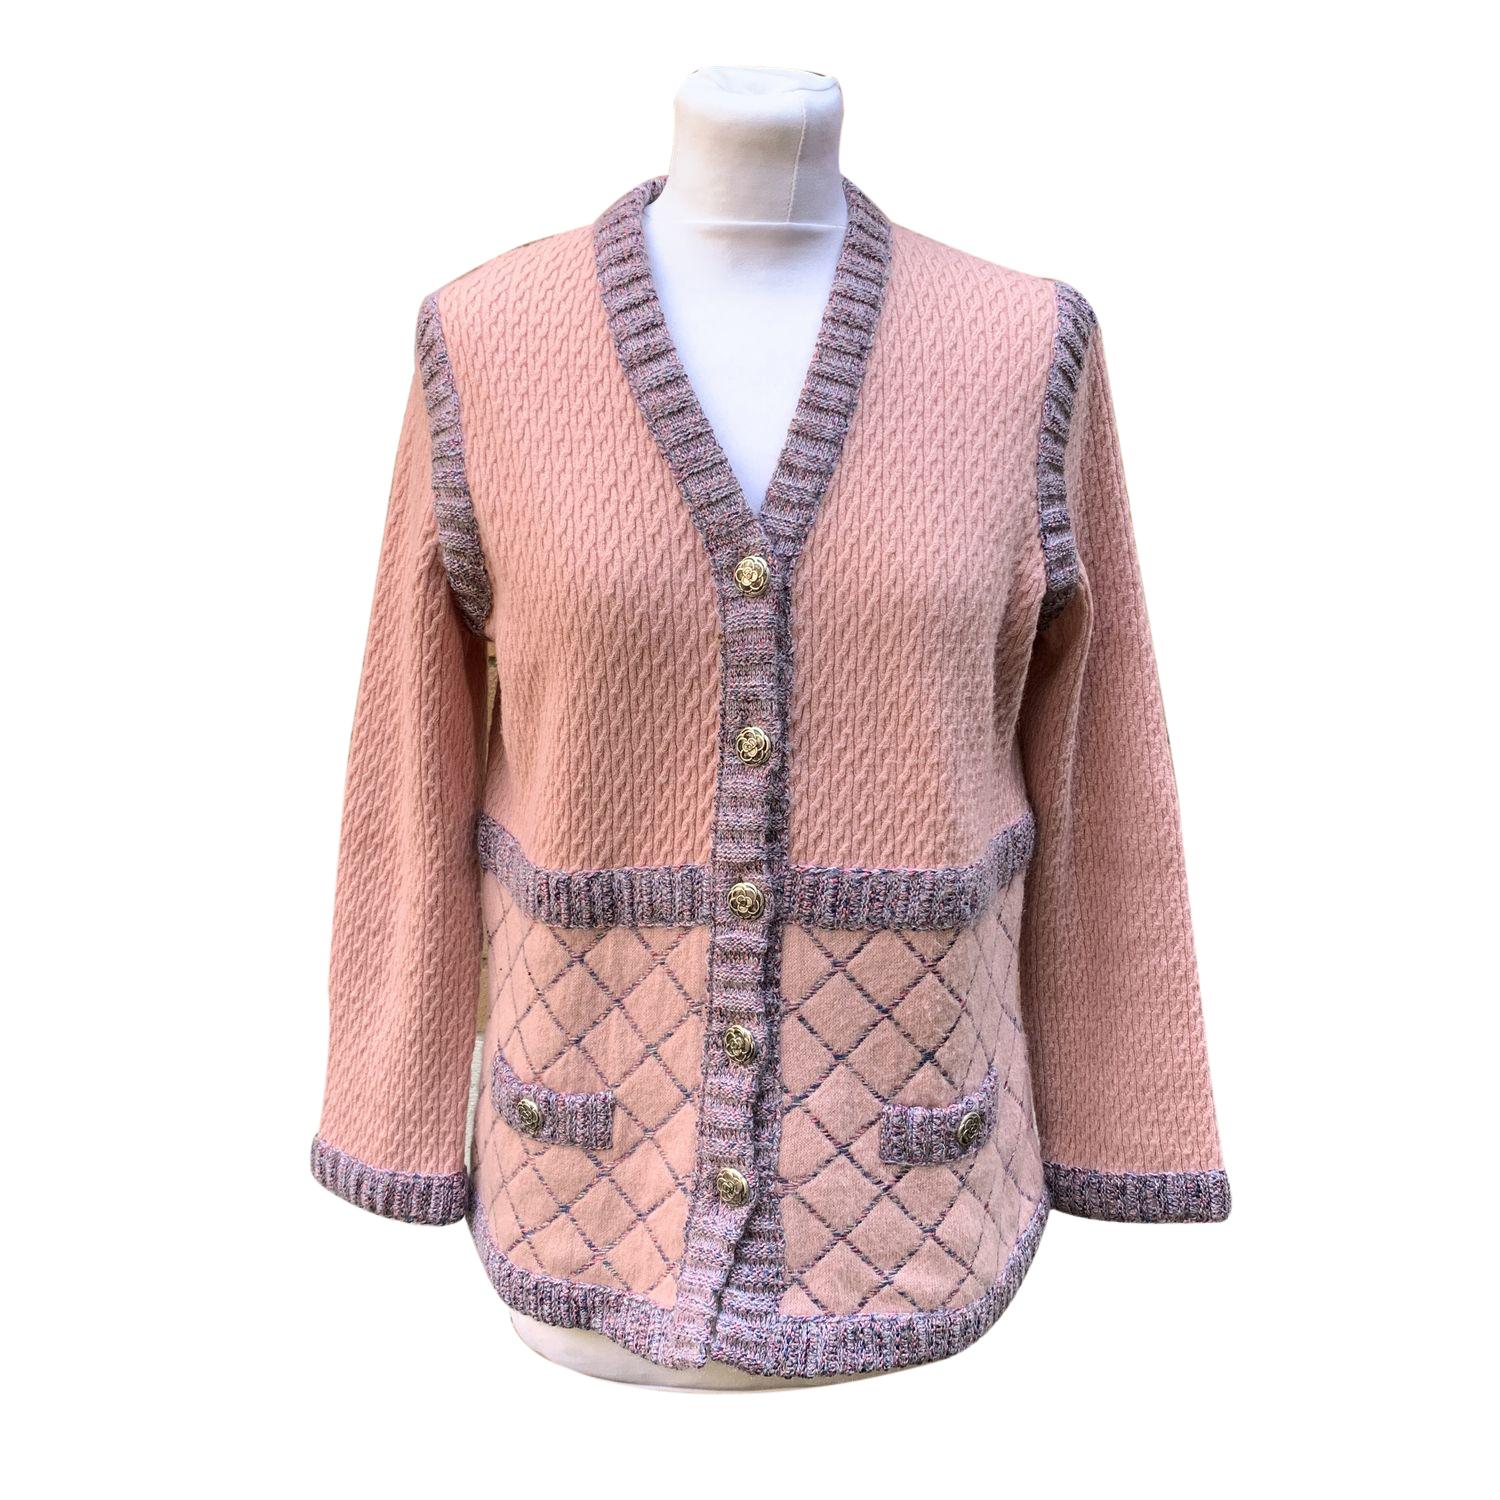 Chanel baby pink Cardigan from the 2015 Fall Collection designed by Karl Lagerfeld. CC logo Camellia buttons. 2 pockets on the front. Quilted detailing. Composition: 50% Silk, 40% Cashmere, 10% Mohair. Size: 40 FR


Details

MATERIAL: Silk

COLOR: